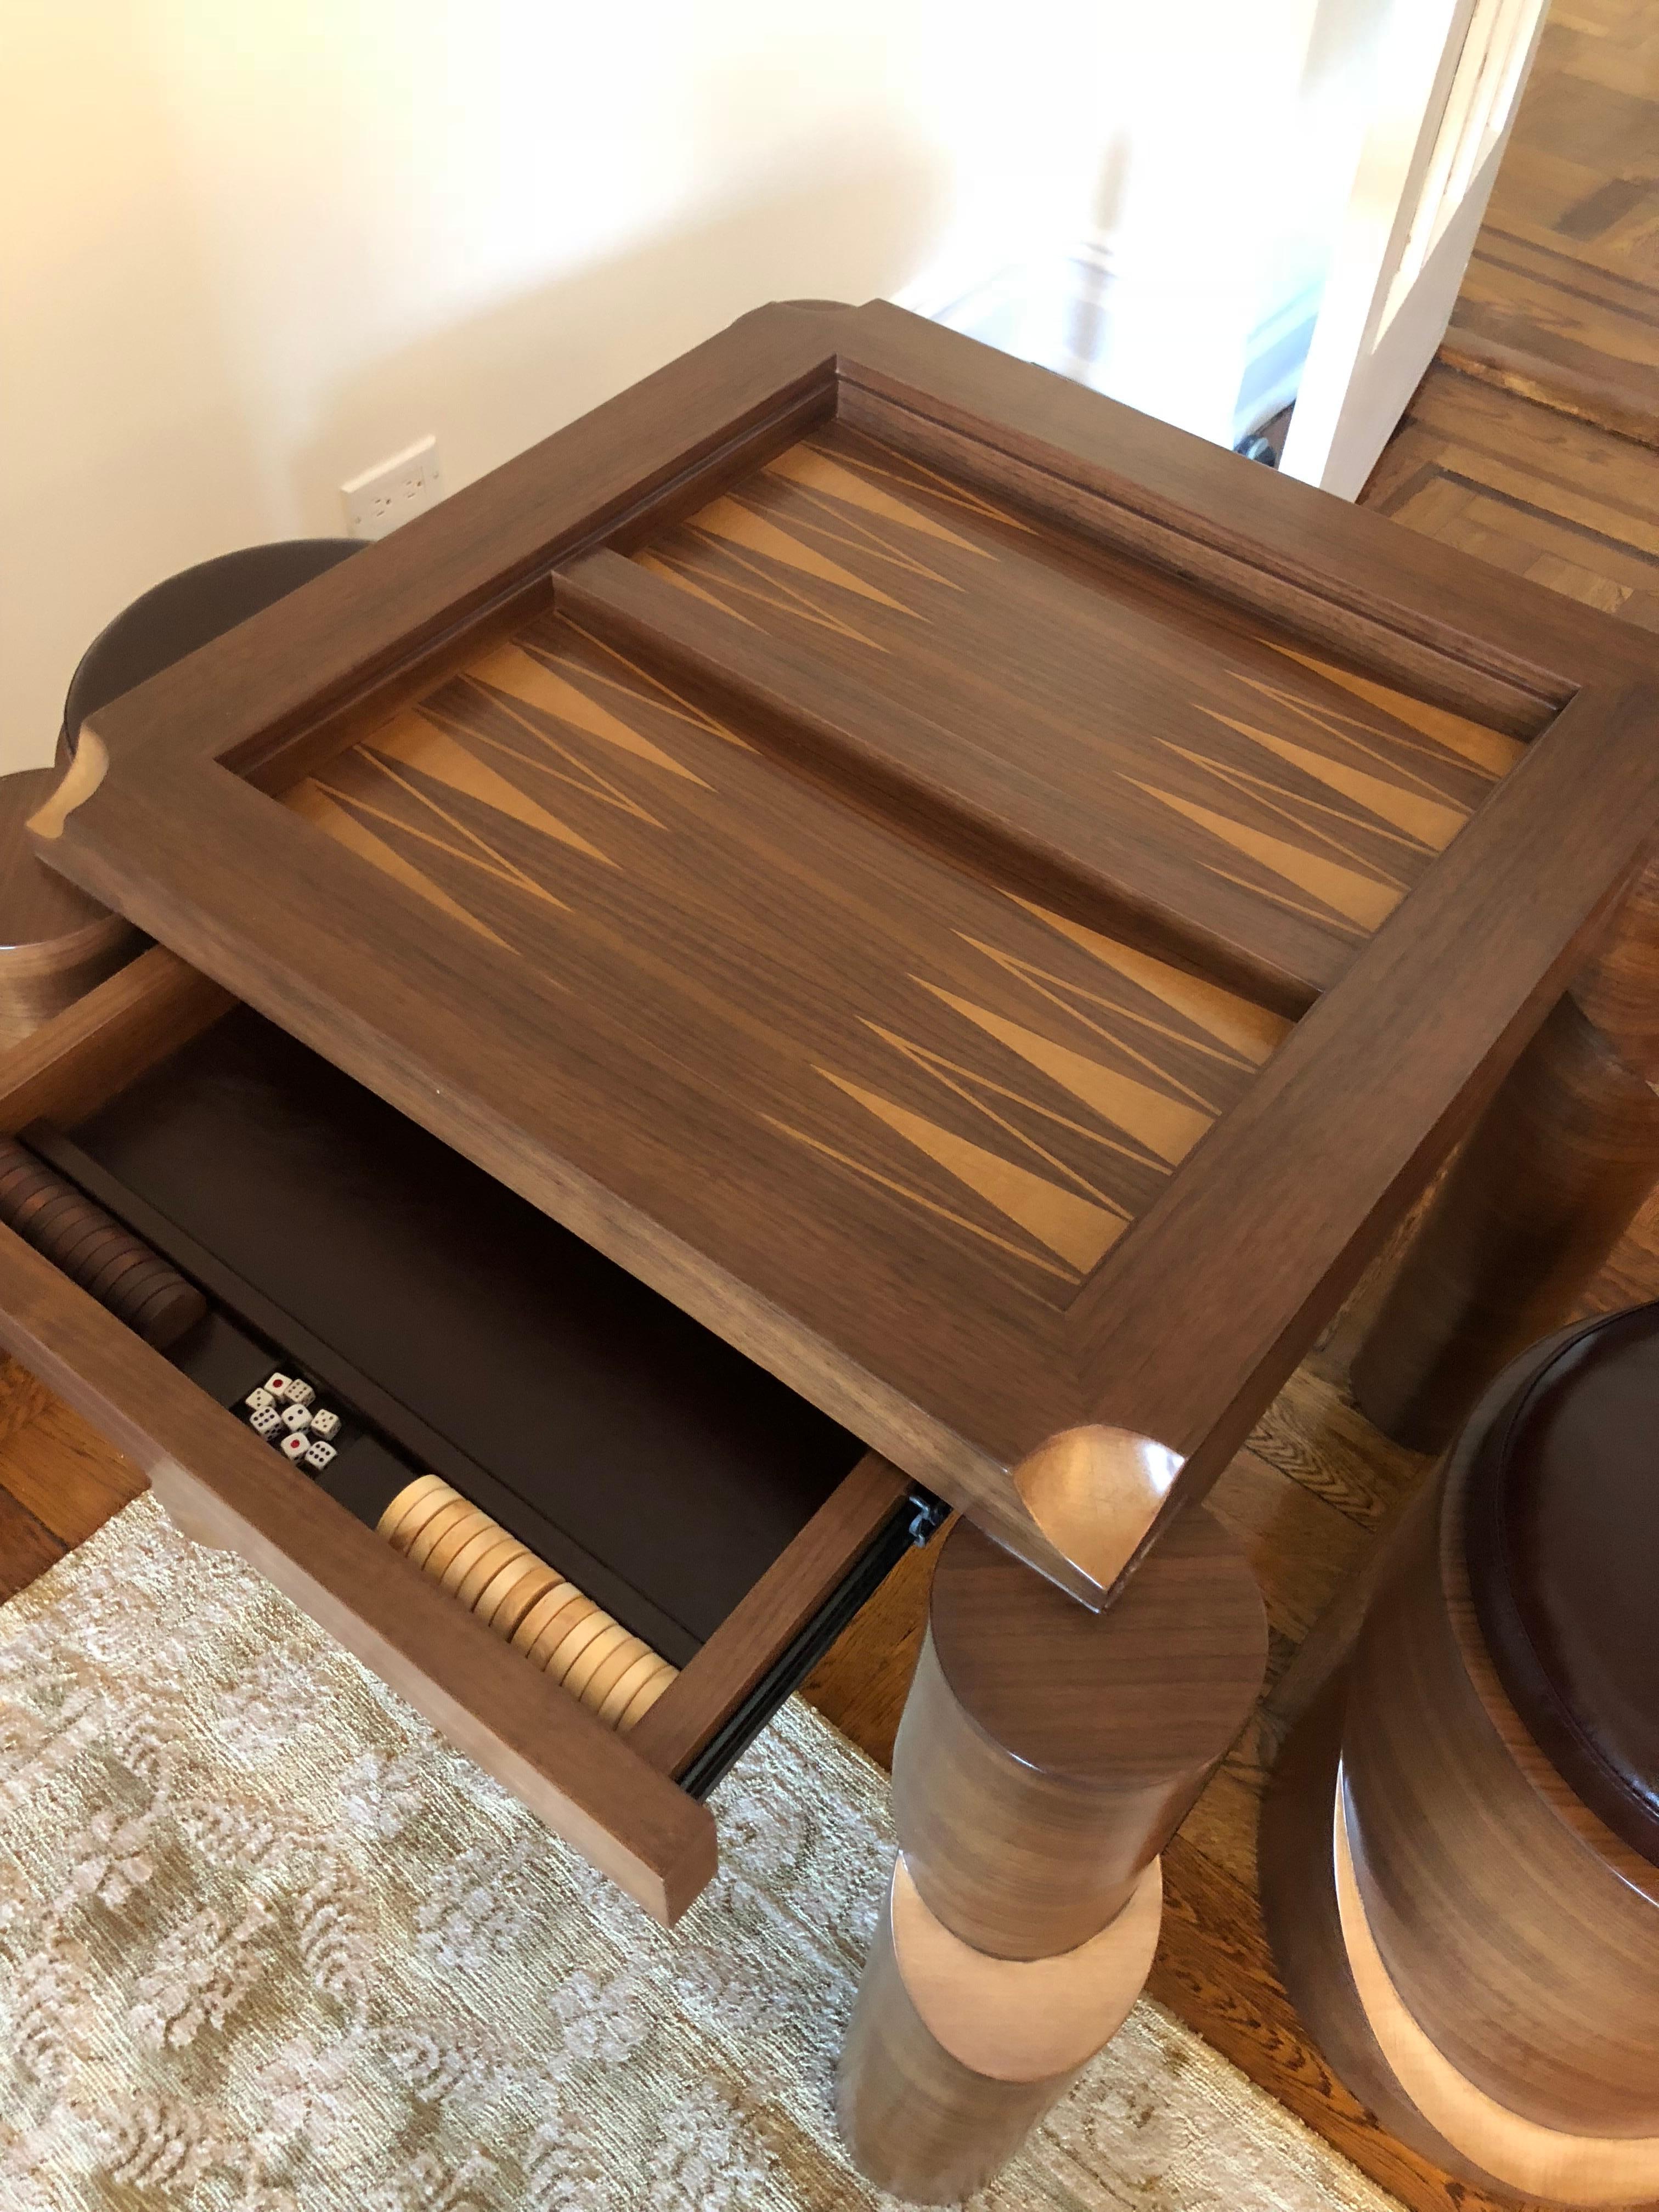 Unique Matte Grandmaster’s game table by Feyzstudio
Dimensions: W 101.6 x D 101.6 x H 76.2 cm
 Stools: D 35.5 x 43.1
Materials: Walnut, maple veneer, leather.


Backgammon & Chess

The ancient game of chess is based on strategy and winning